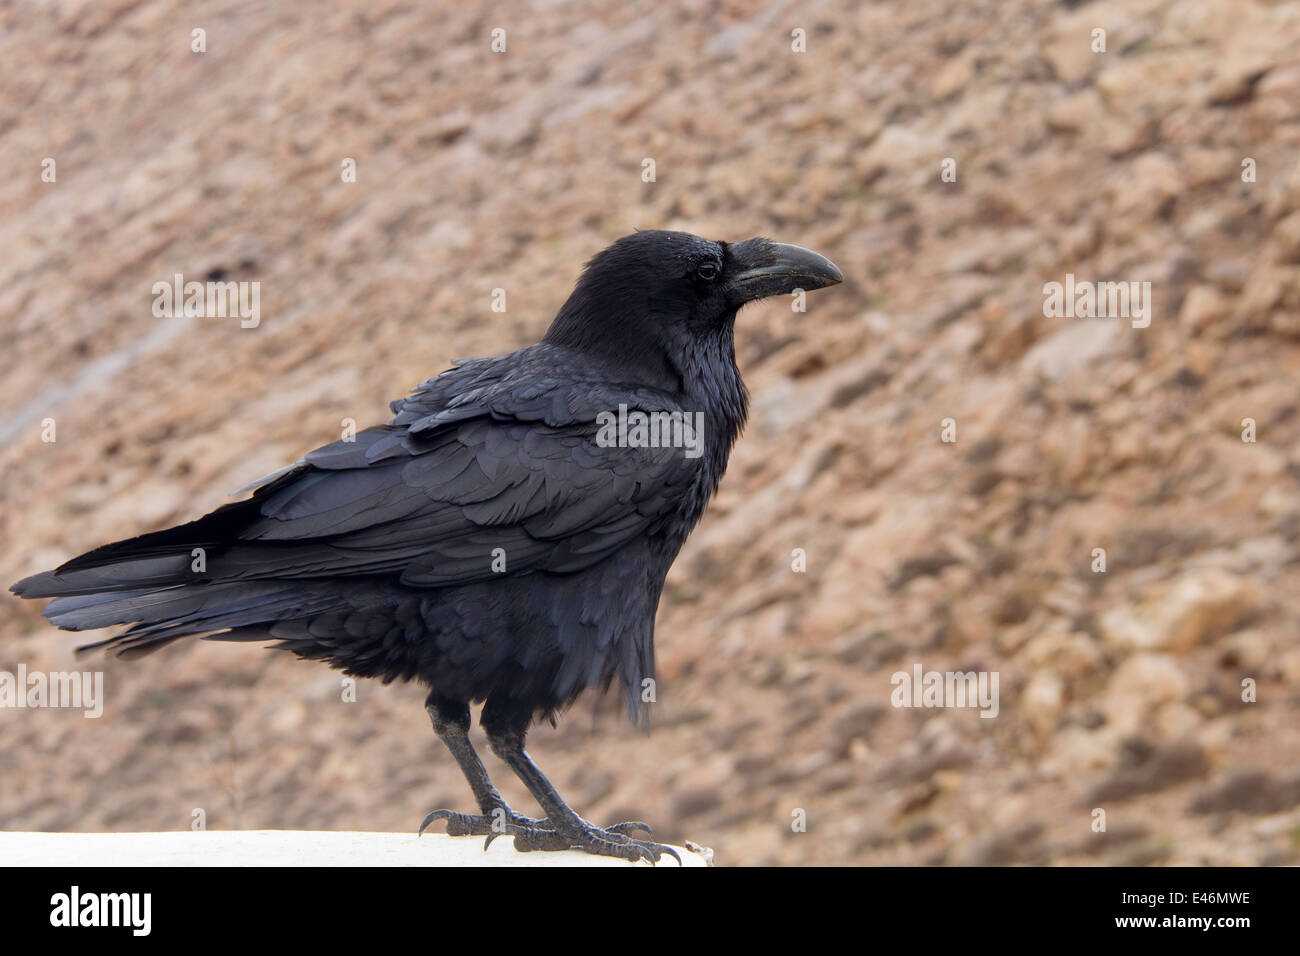 Raven perched on a ledge Stock Photo